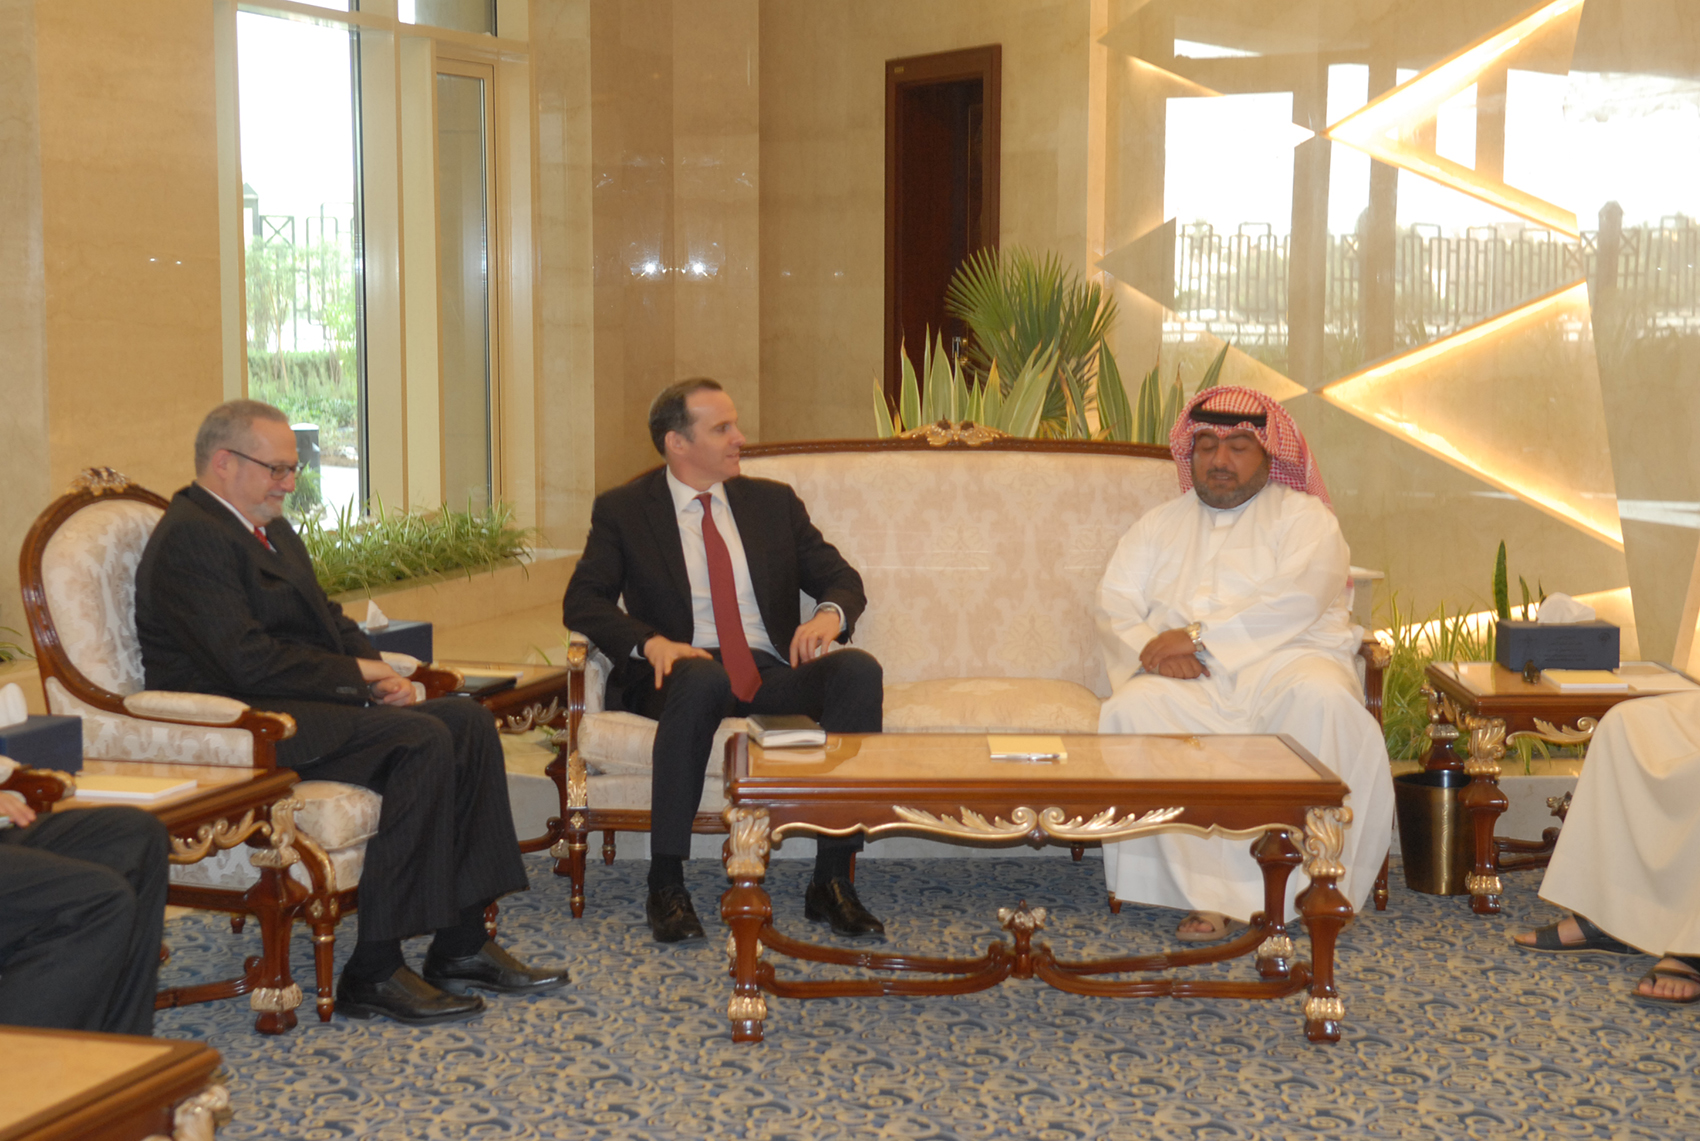 Kuwait's National Security Bureau Chief Sheikh Thamer Al-Ali Al-Sabah meets with U.S. envoy for the global coalition against the so-called Islamic State (IS) Brett McGurk